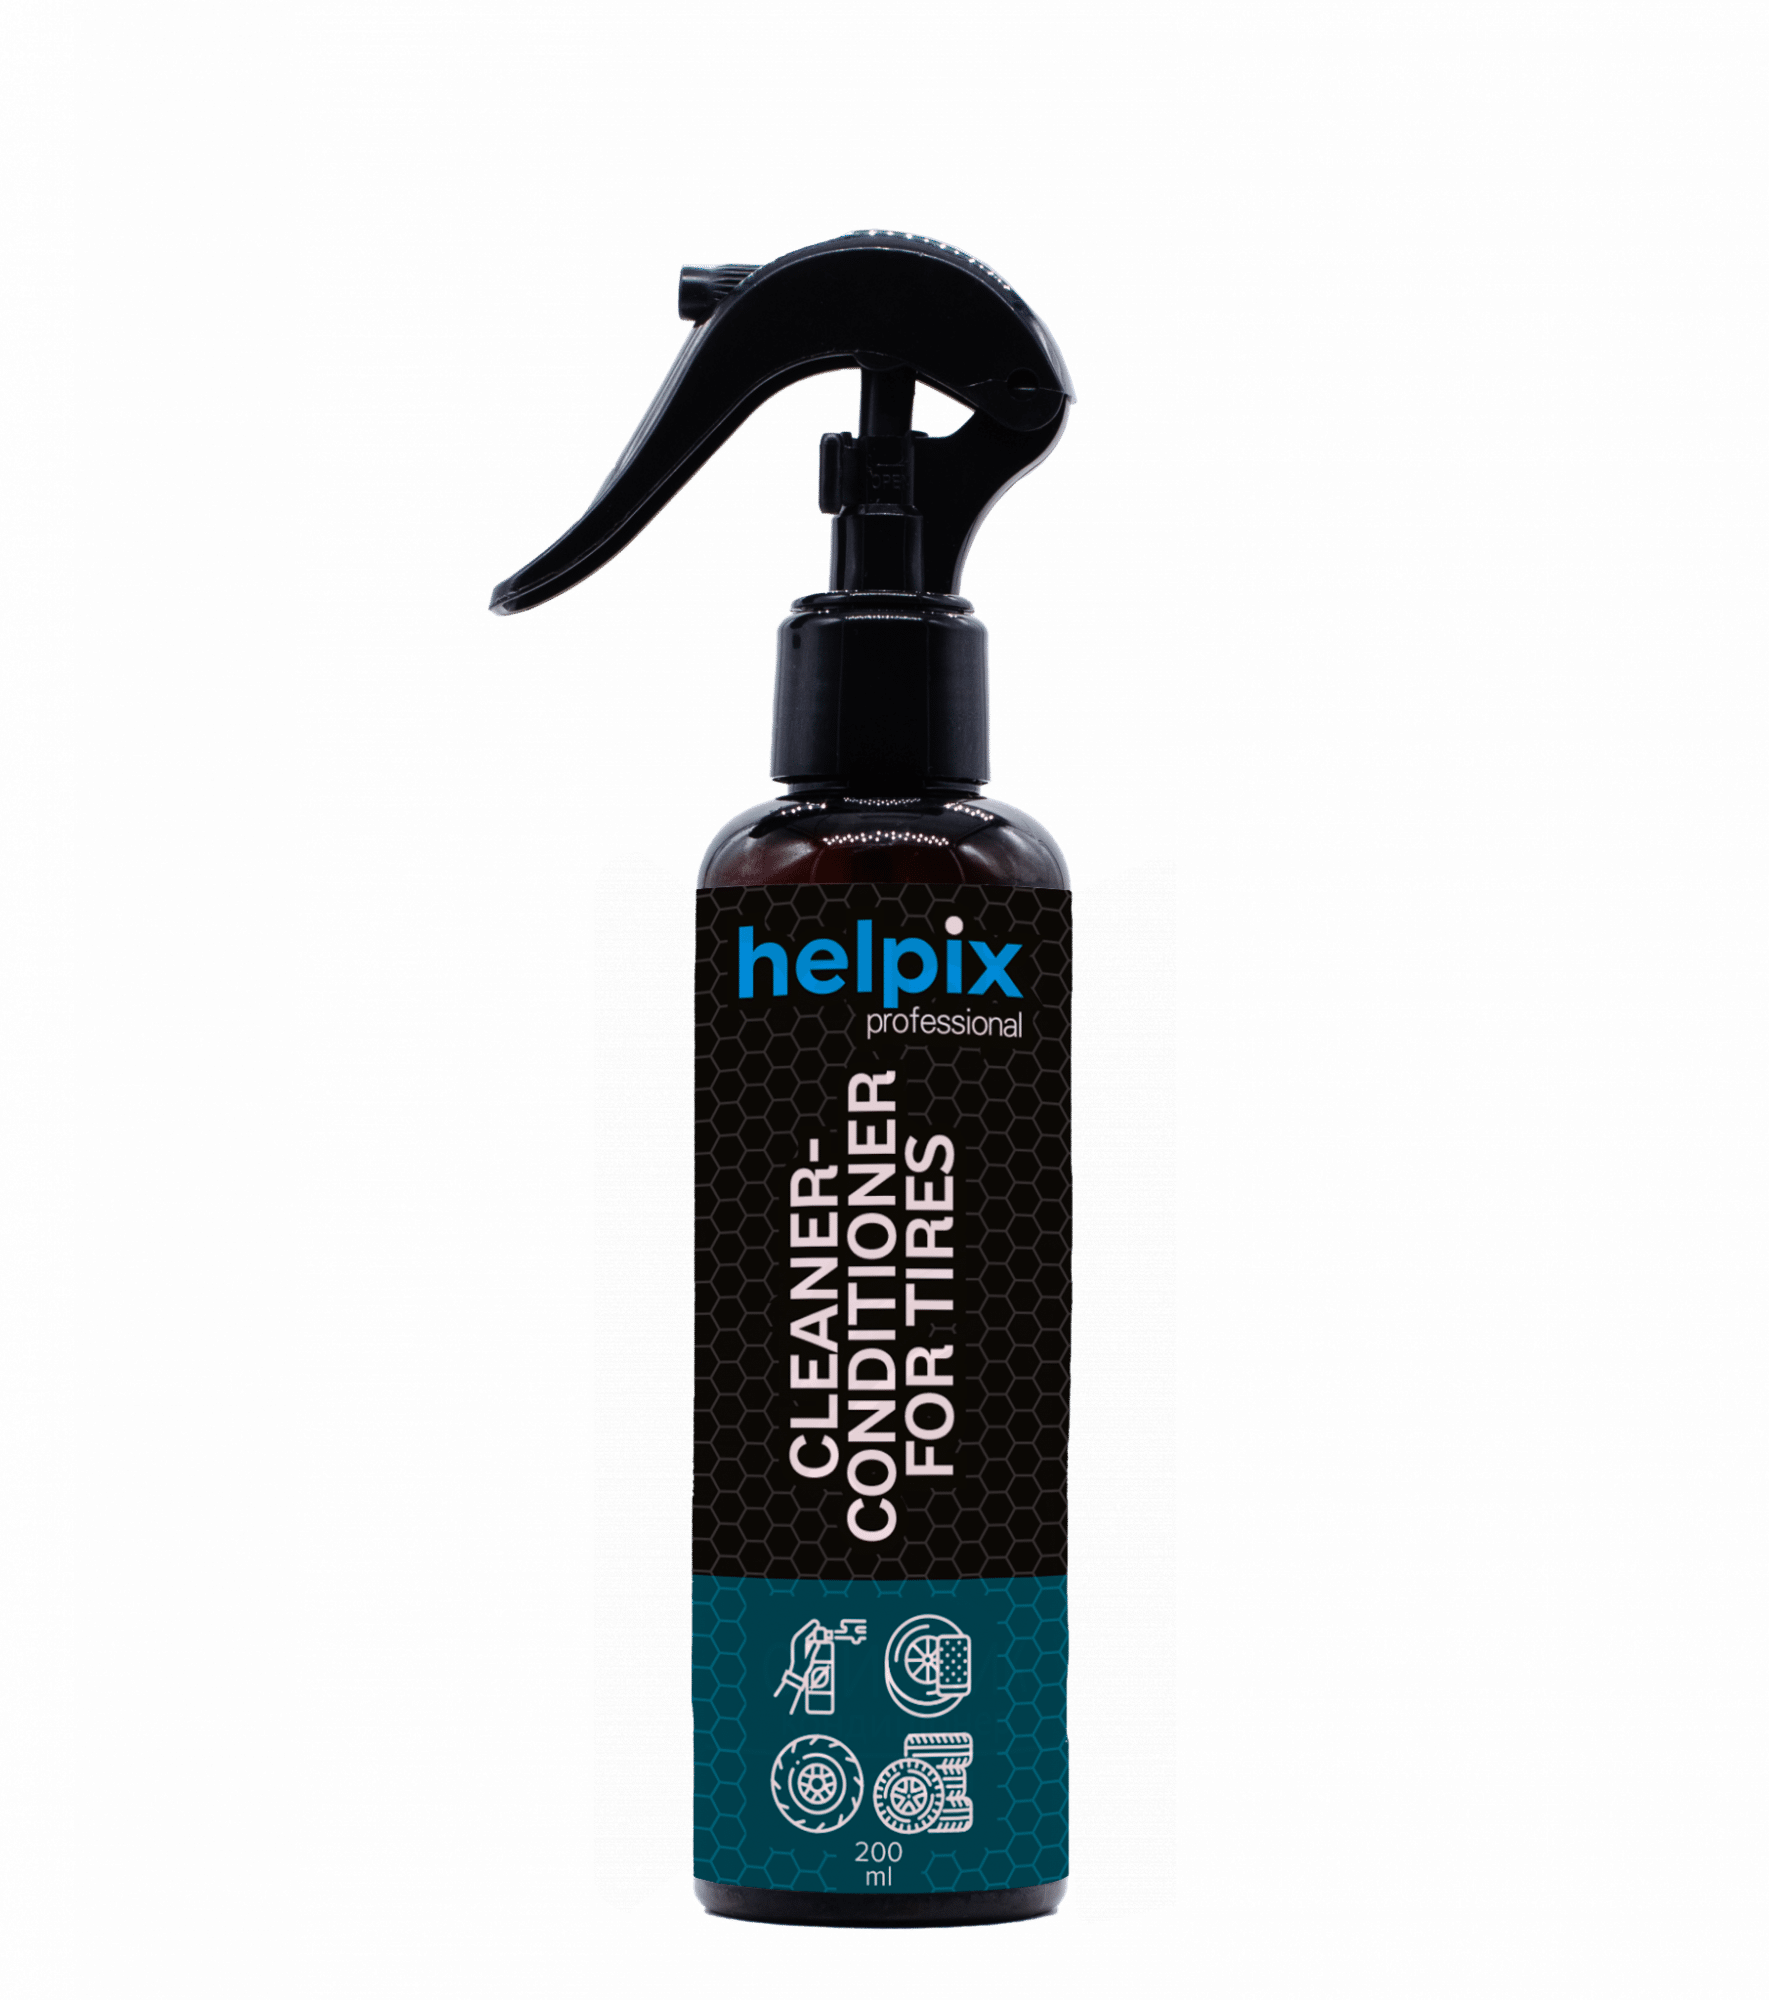 HELPIX - Cleaner conditioner for tires